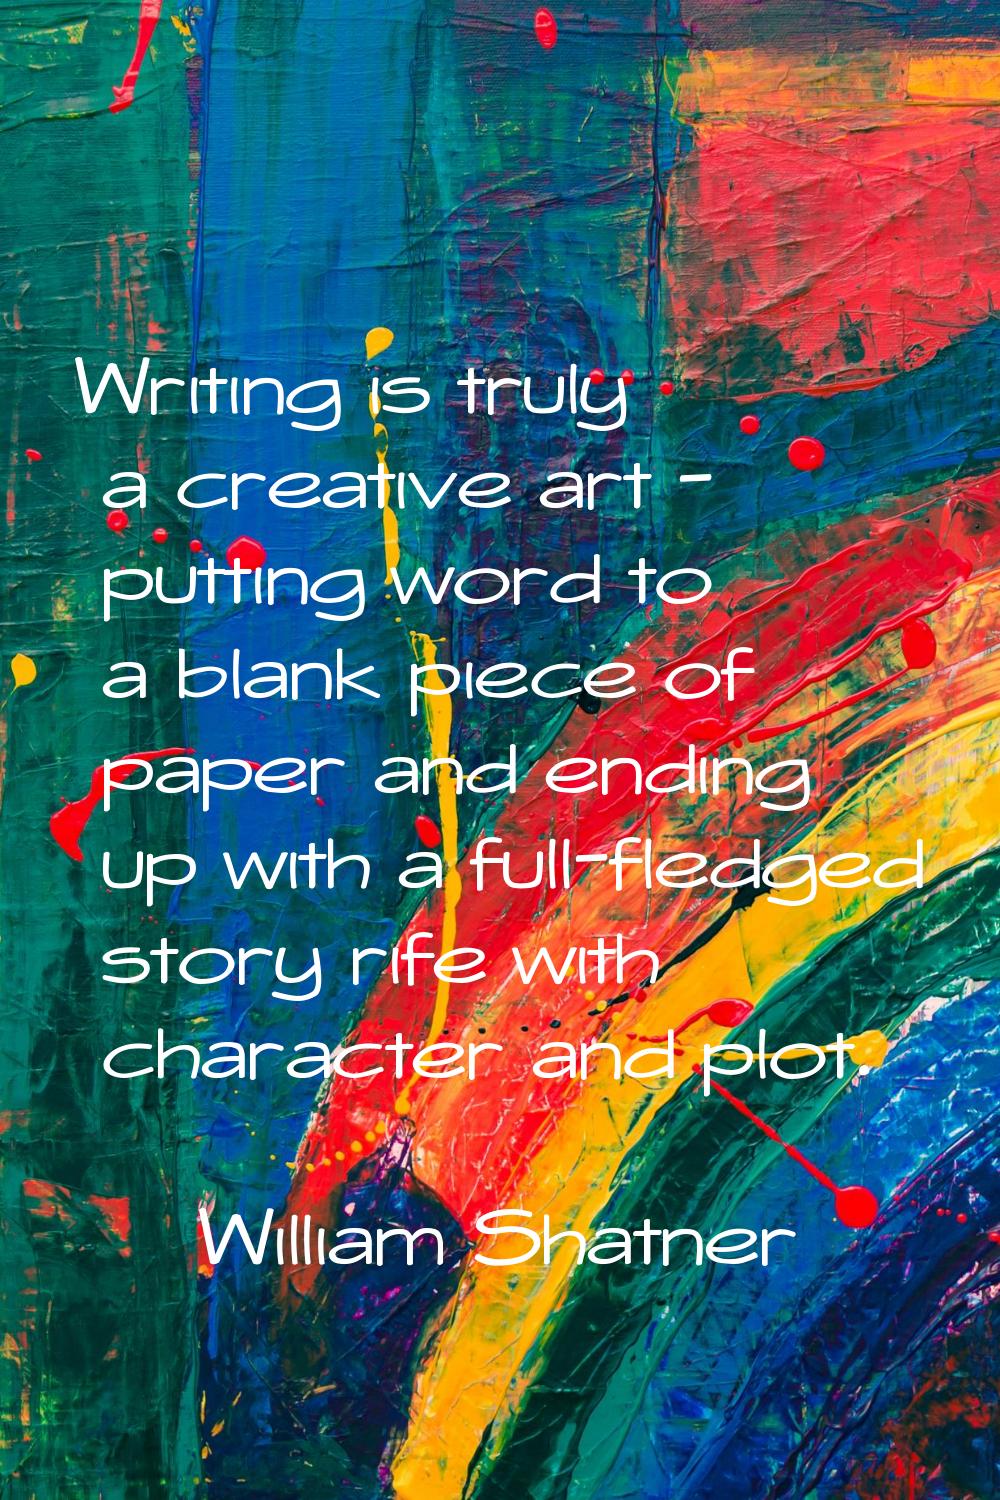 Writing is truly a creative art - putting word to a blank piece of paper and ending up with a full-